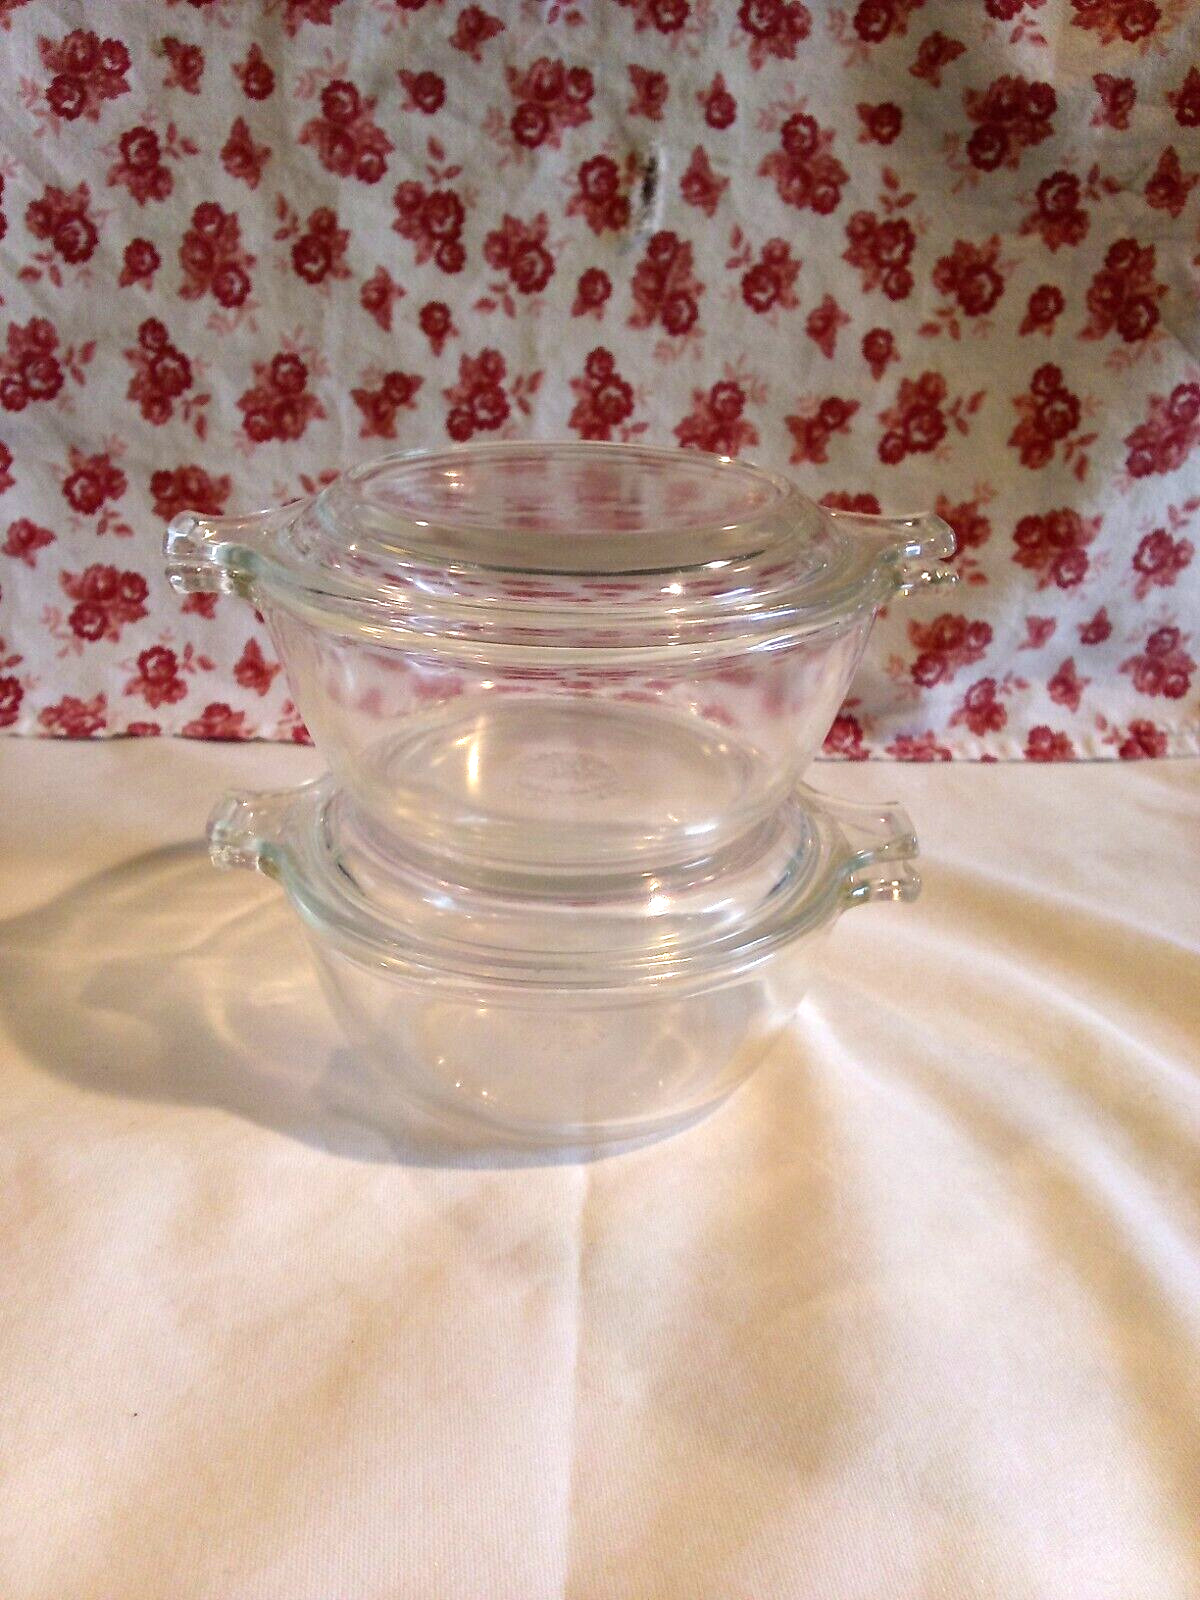 2 Vintage Pyrex 10 oz. Glass Casserole/Refrigerator Dishes # 018 with Lids 680-C